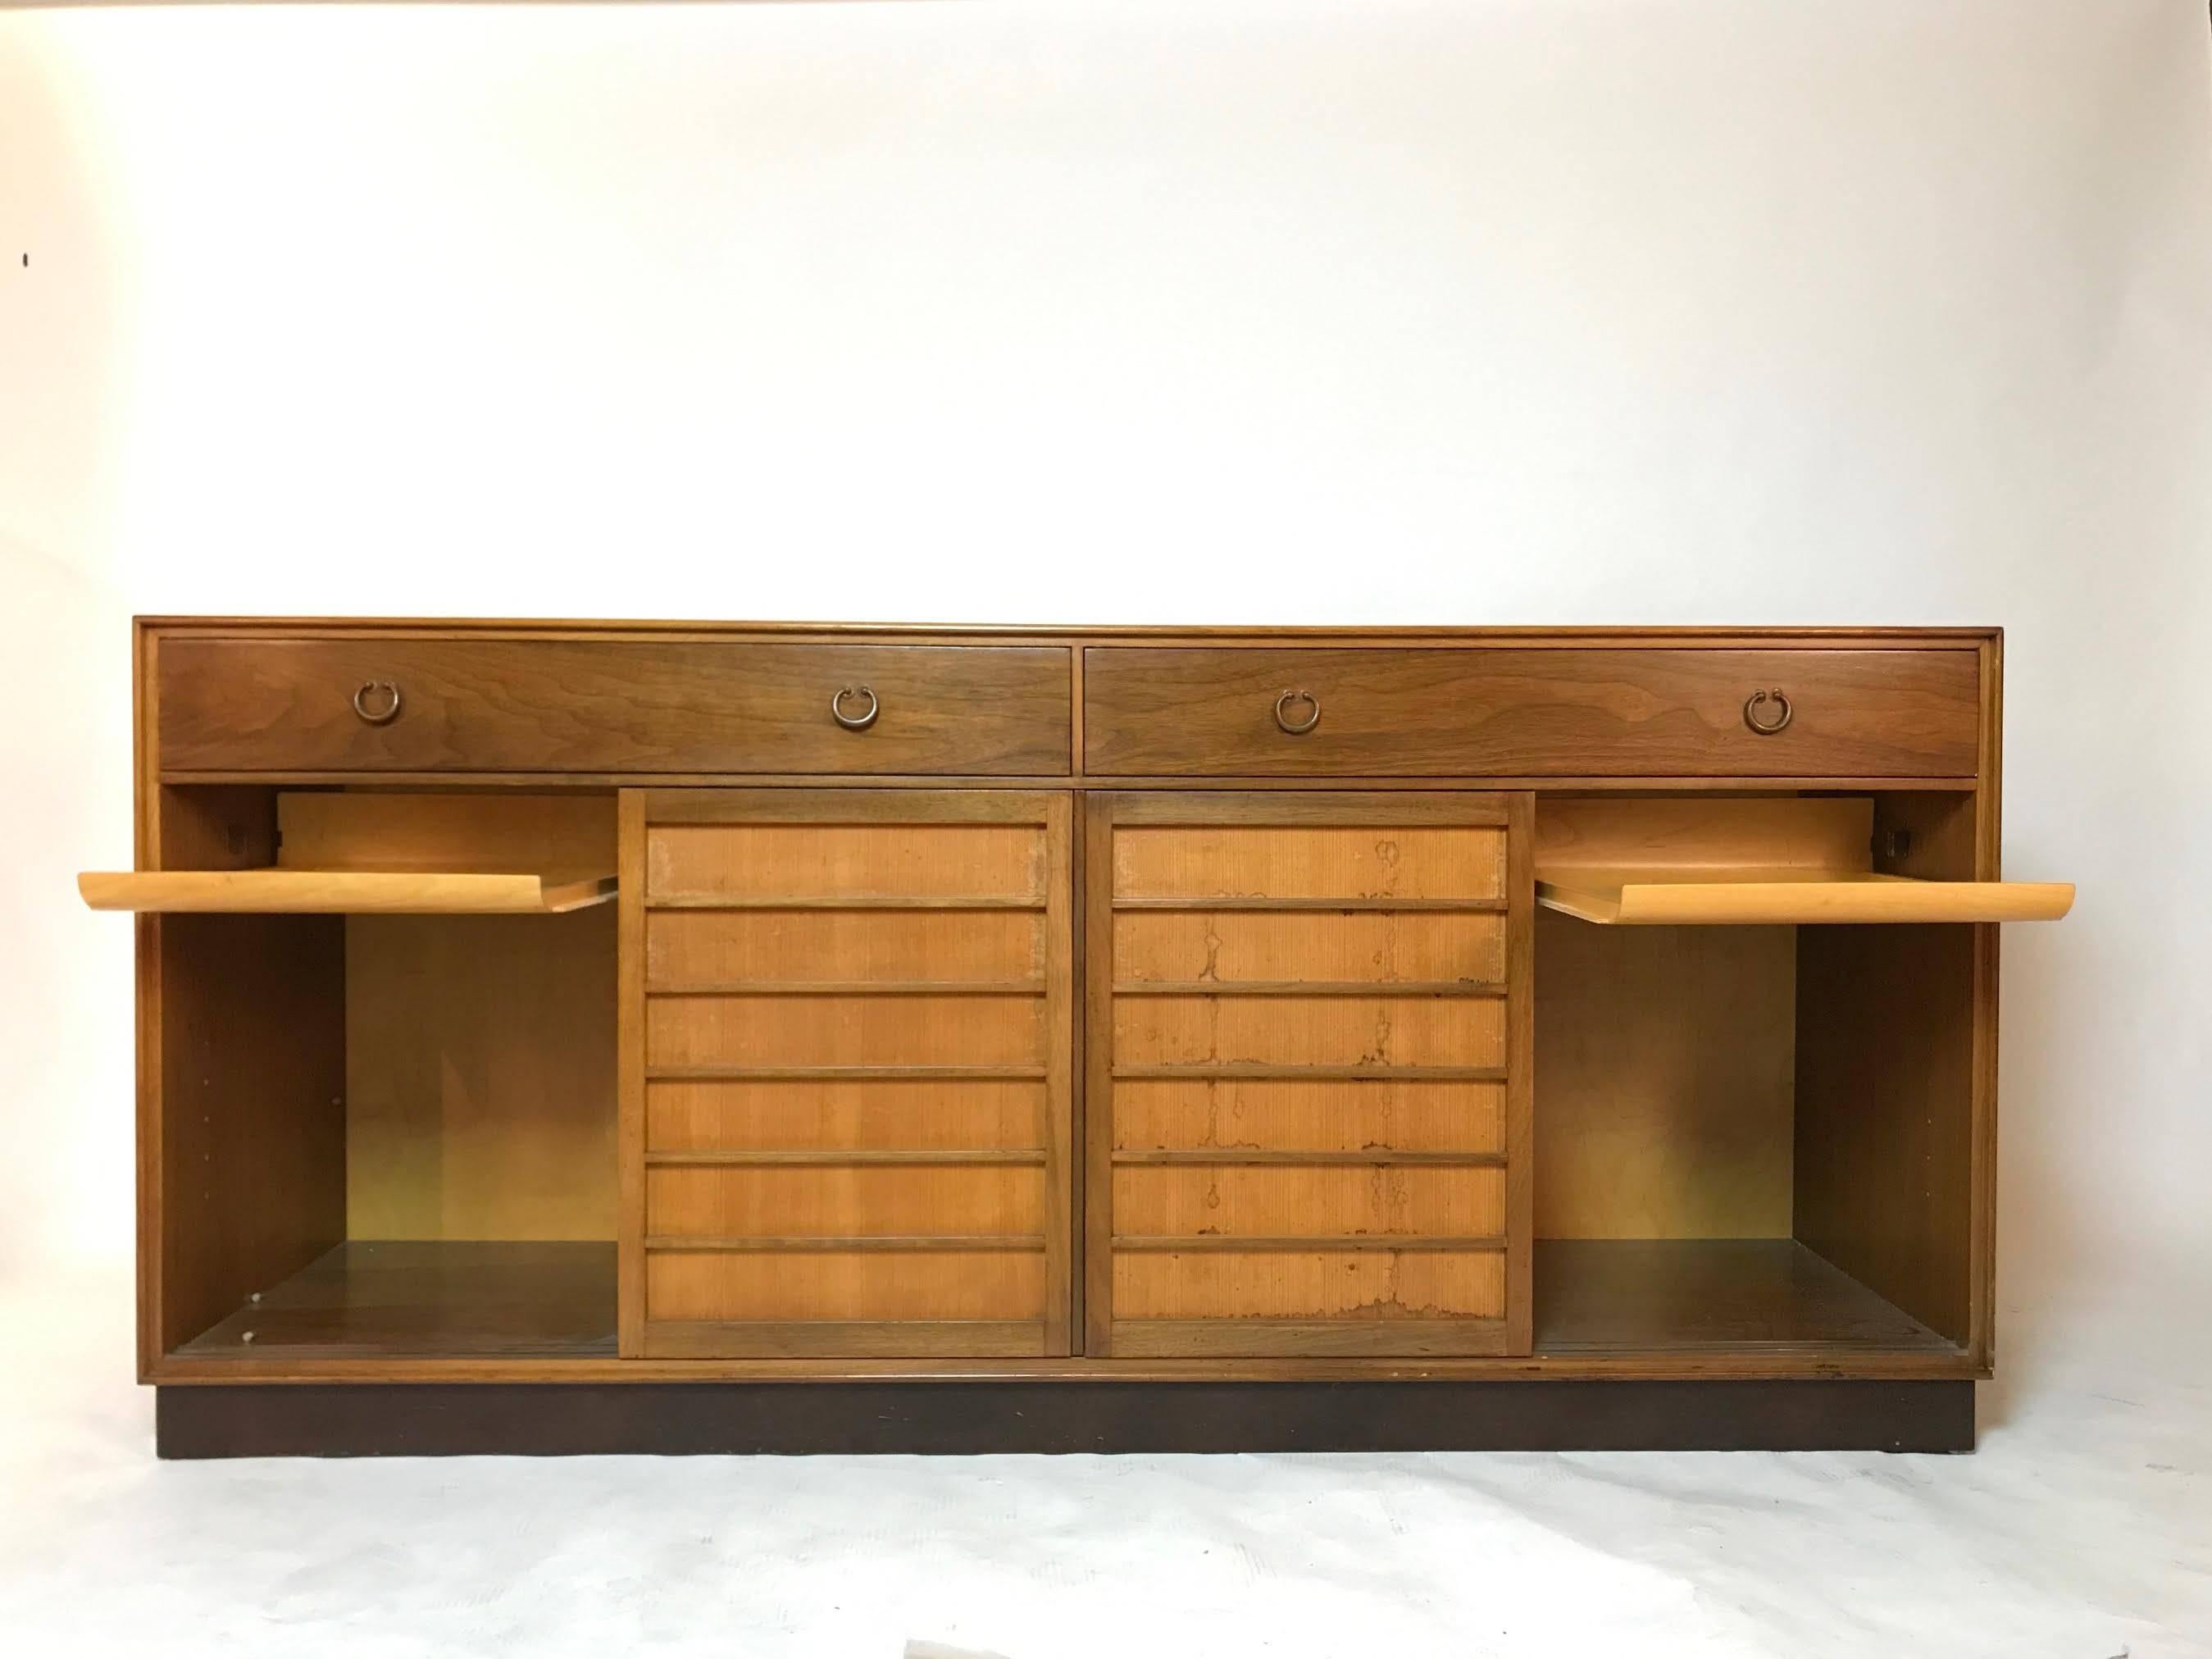 This sideboard designed by Edward Wormley for Dunbar is an Early Example from the 1950s
(Model 671A Berne Indiana)
Walnut
Rectangular top over four sliding doors. Interior fitted with pullout trays. Green Dunbar label.